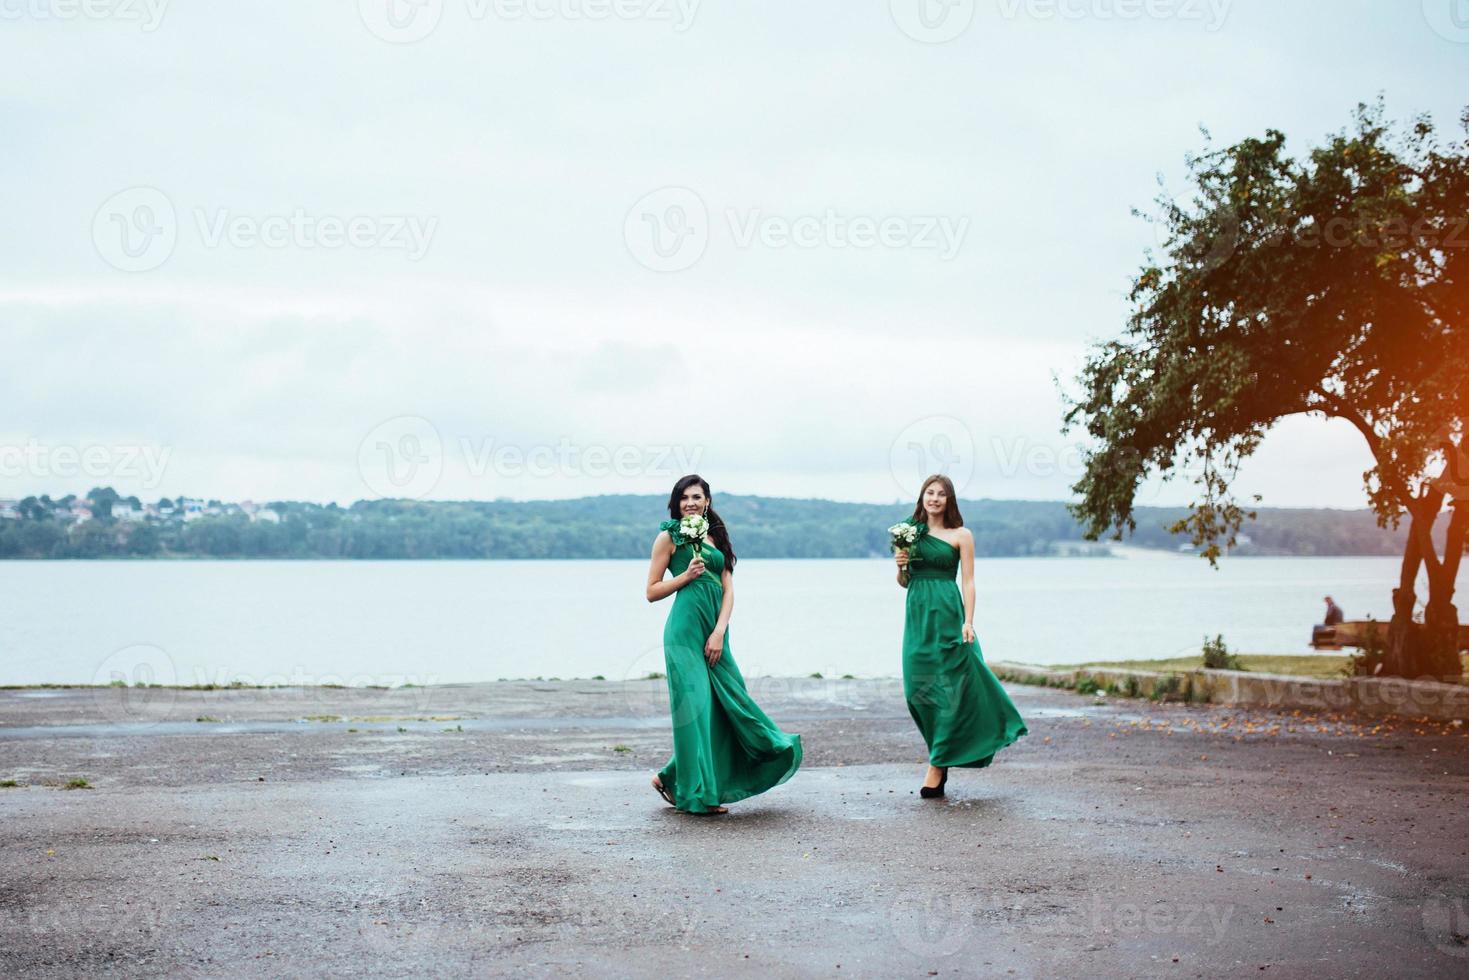 Happy young women at a wedding with bouquets of flowers photo